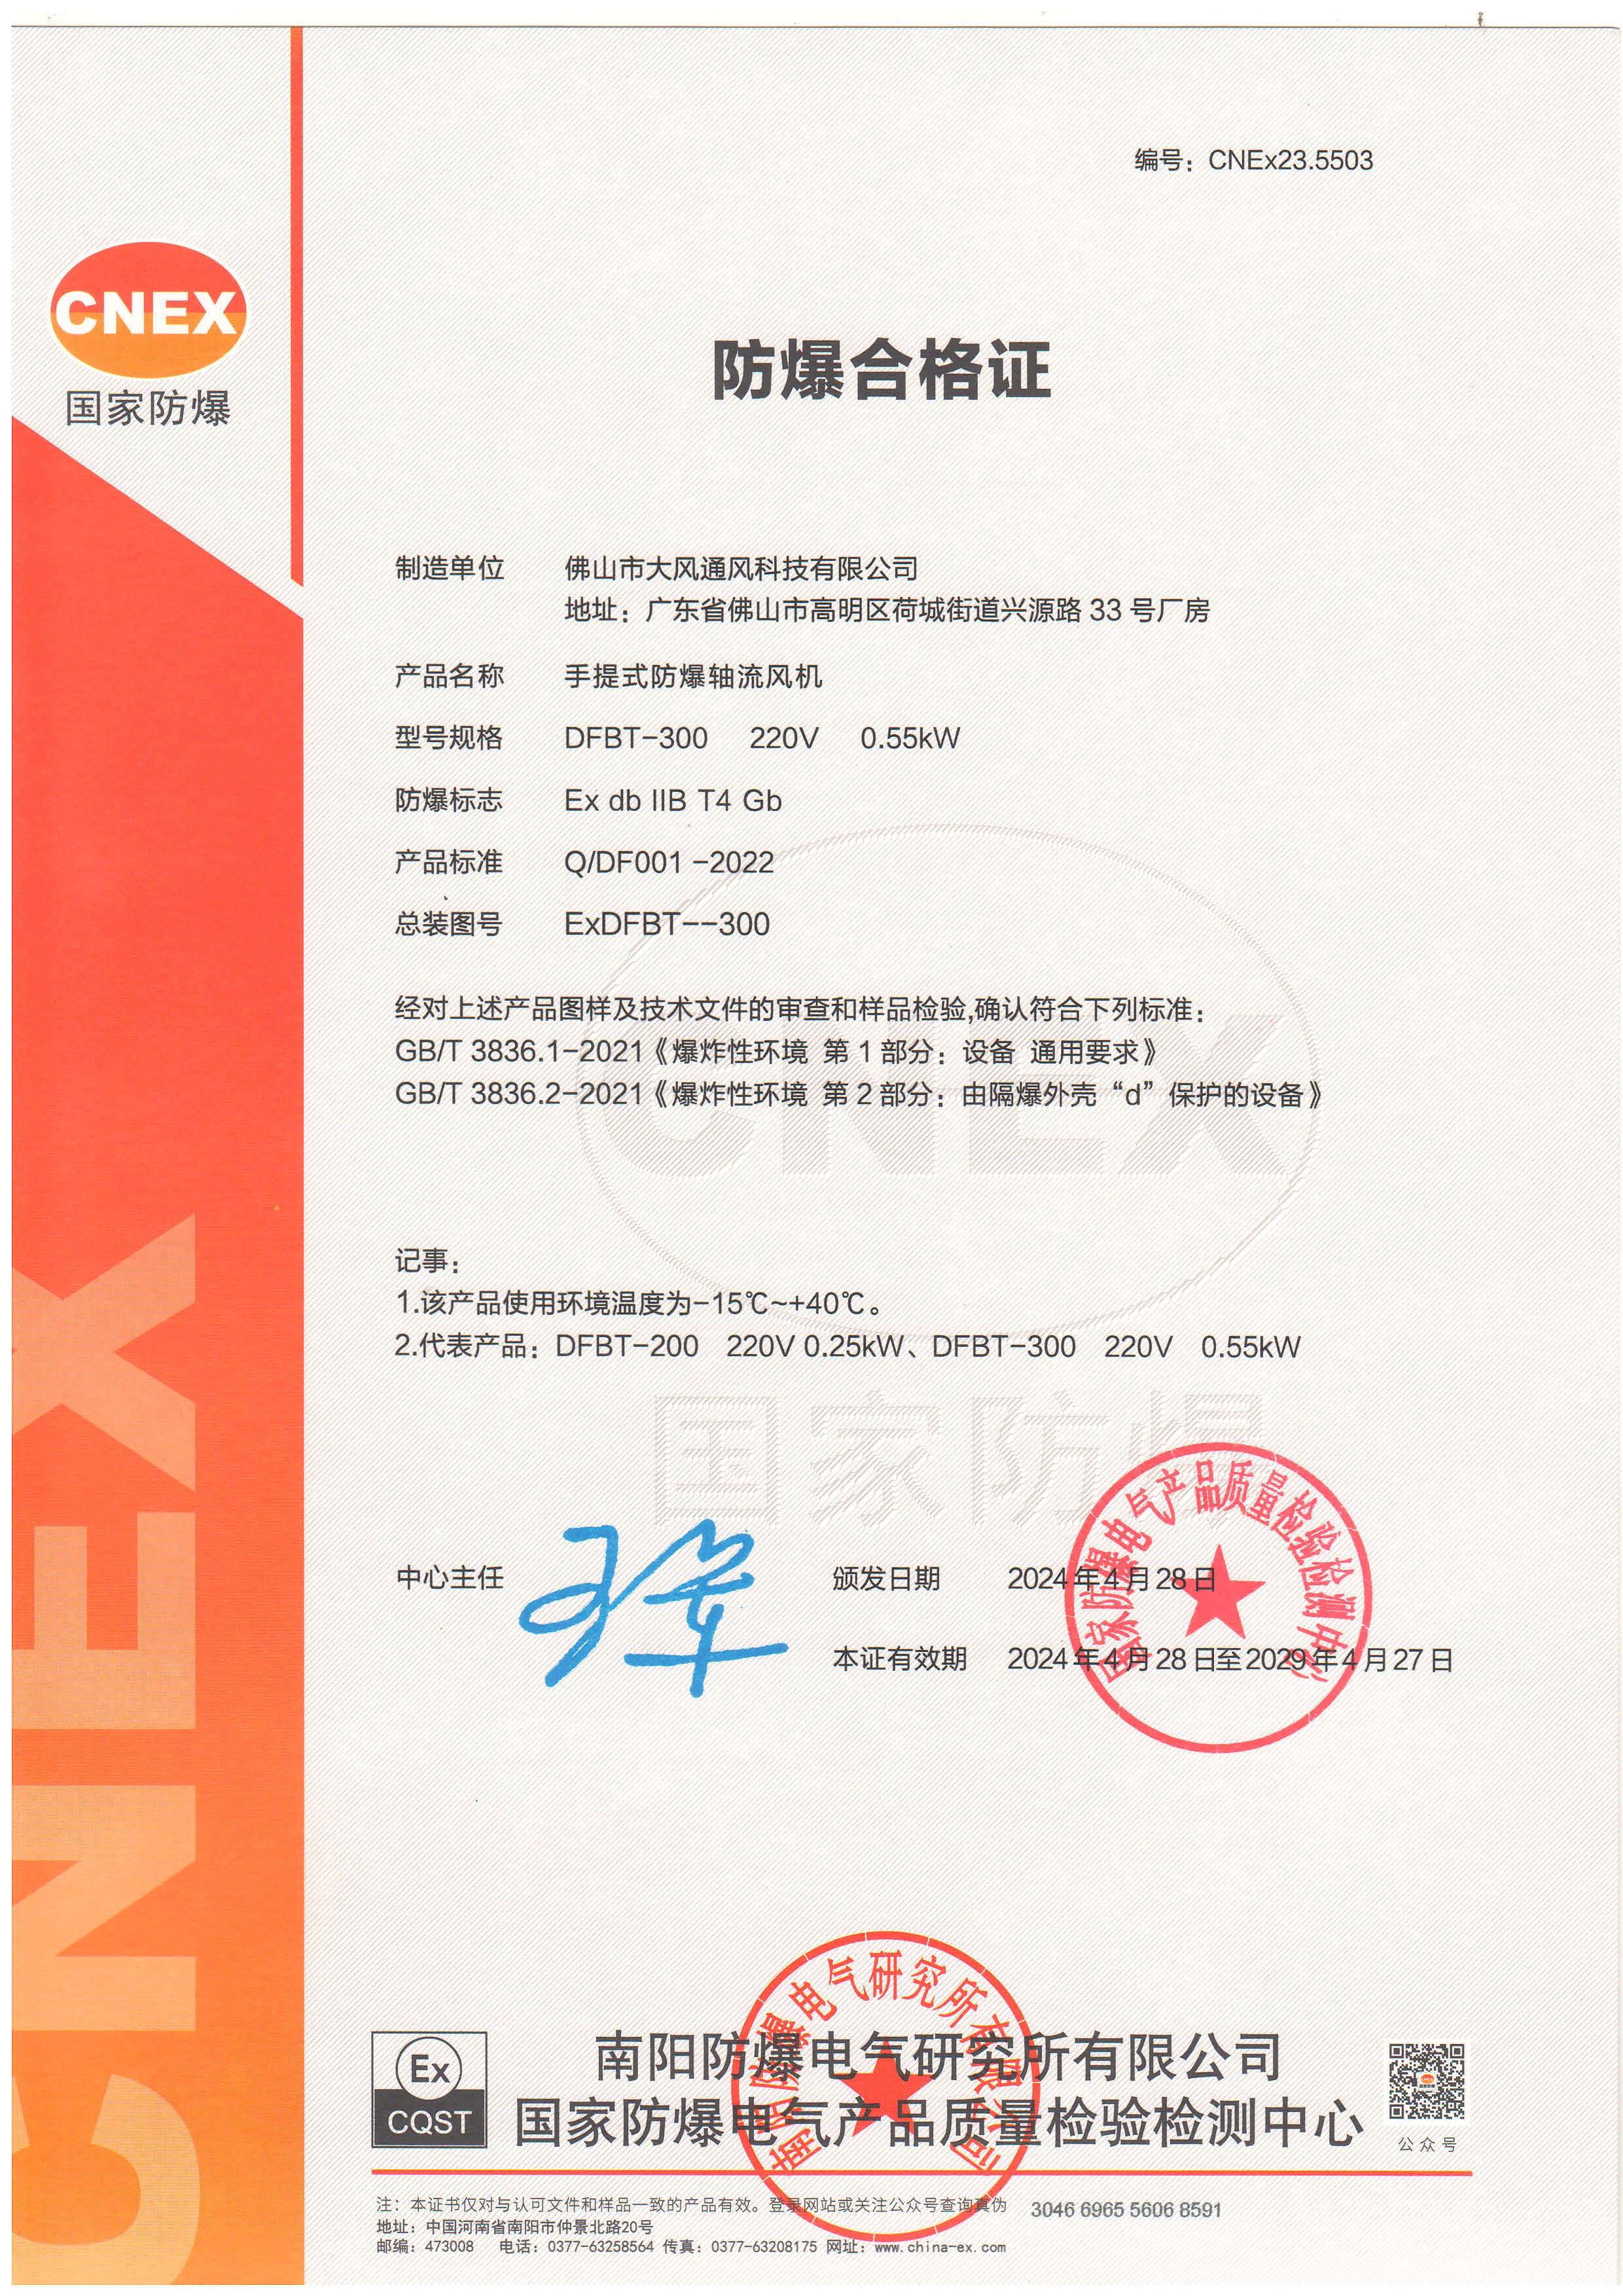 Congratulations to DAFENG for Explosion proof certificate: Explosion Proof Portable Axial Blower Fan